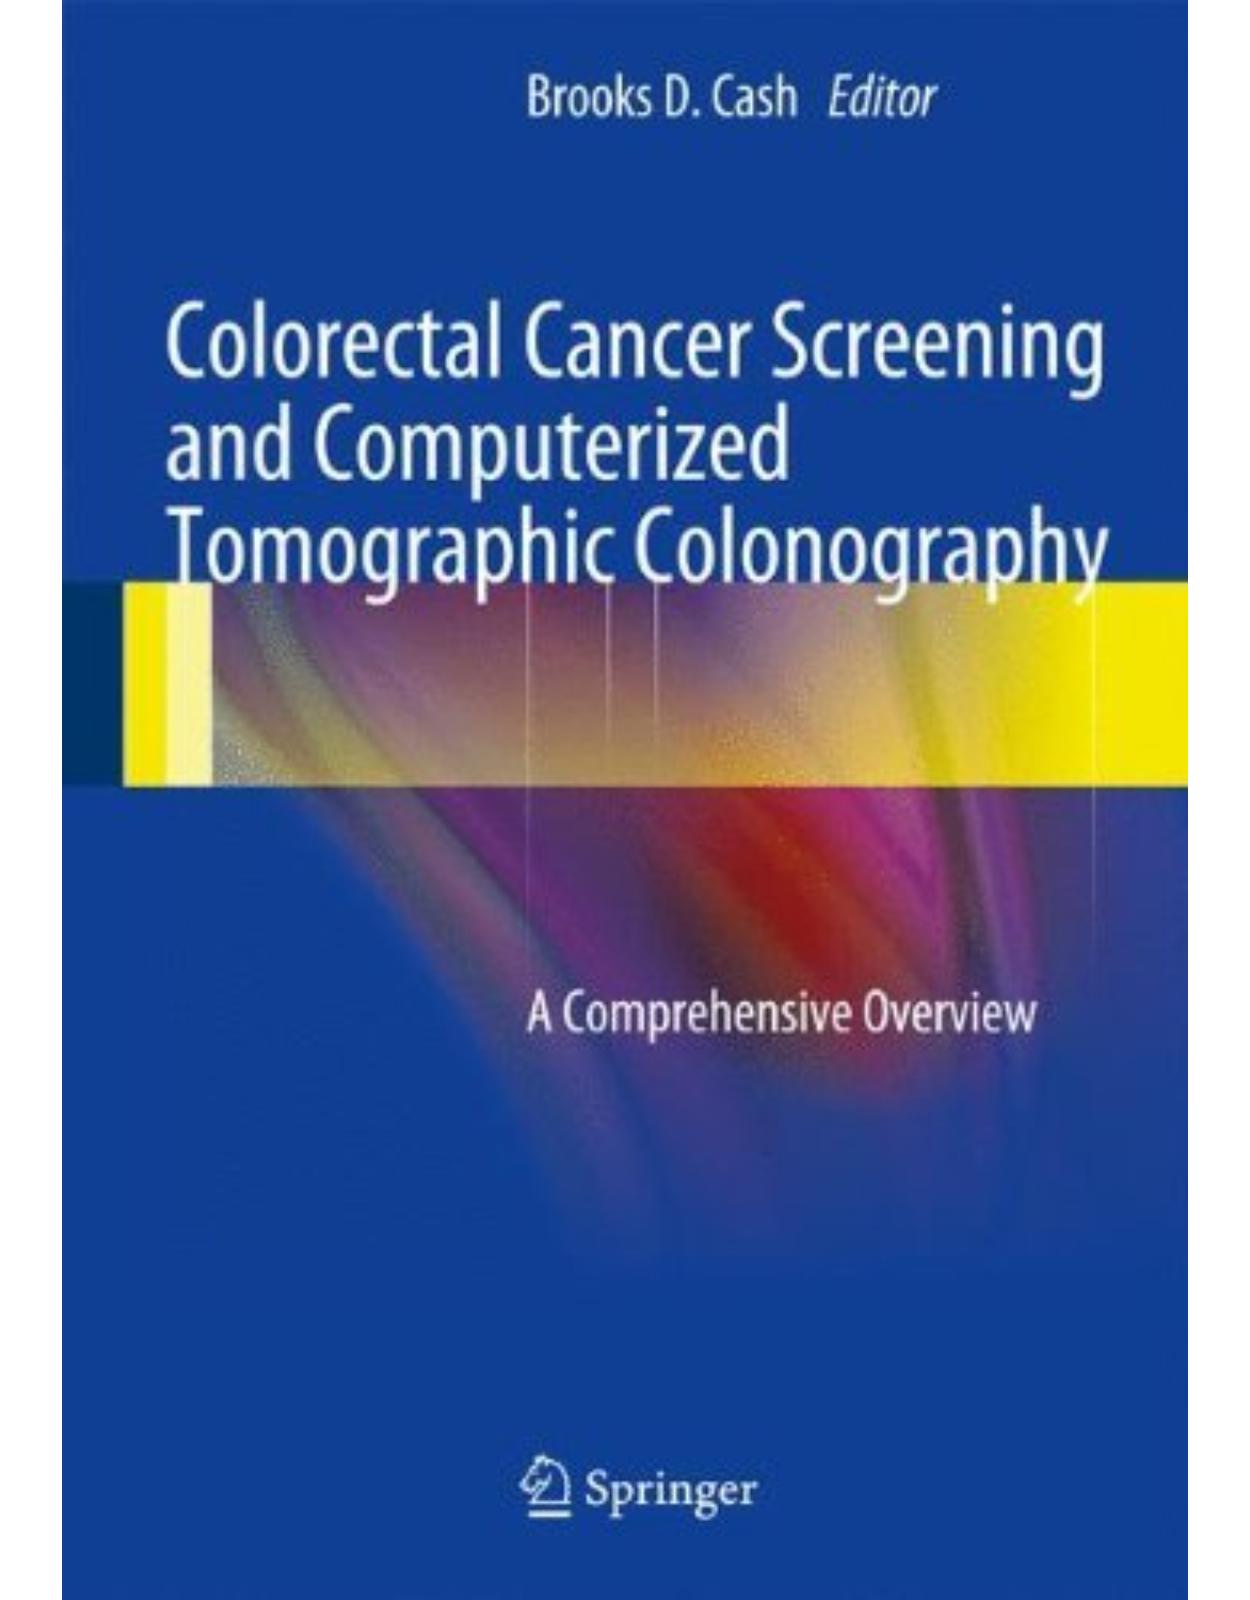 Colorectal Cancer Screening and Computerized Tomographic Colonography: A Comprehensive Overview